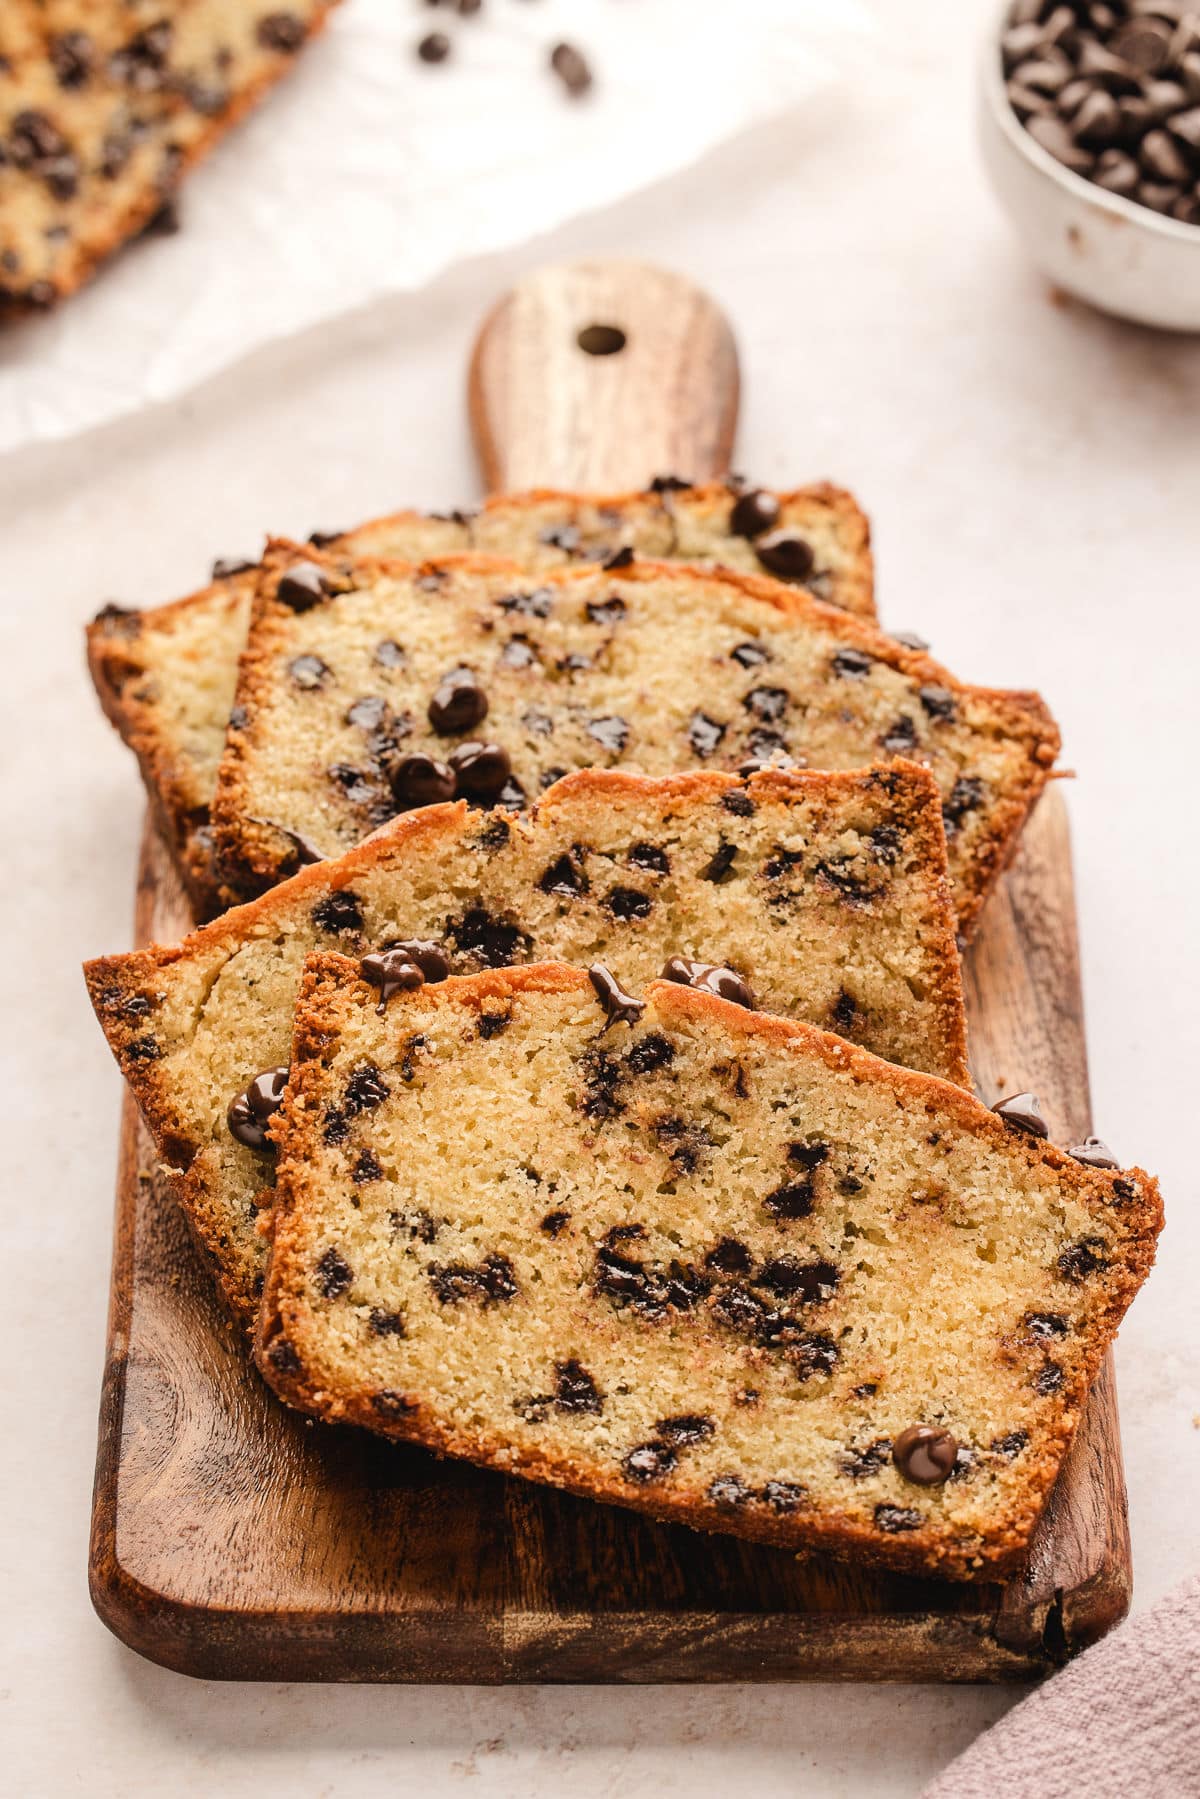 Slices of chocolate chip loaf cake on a wooden cutting board.